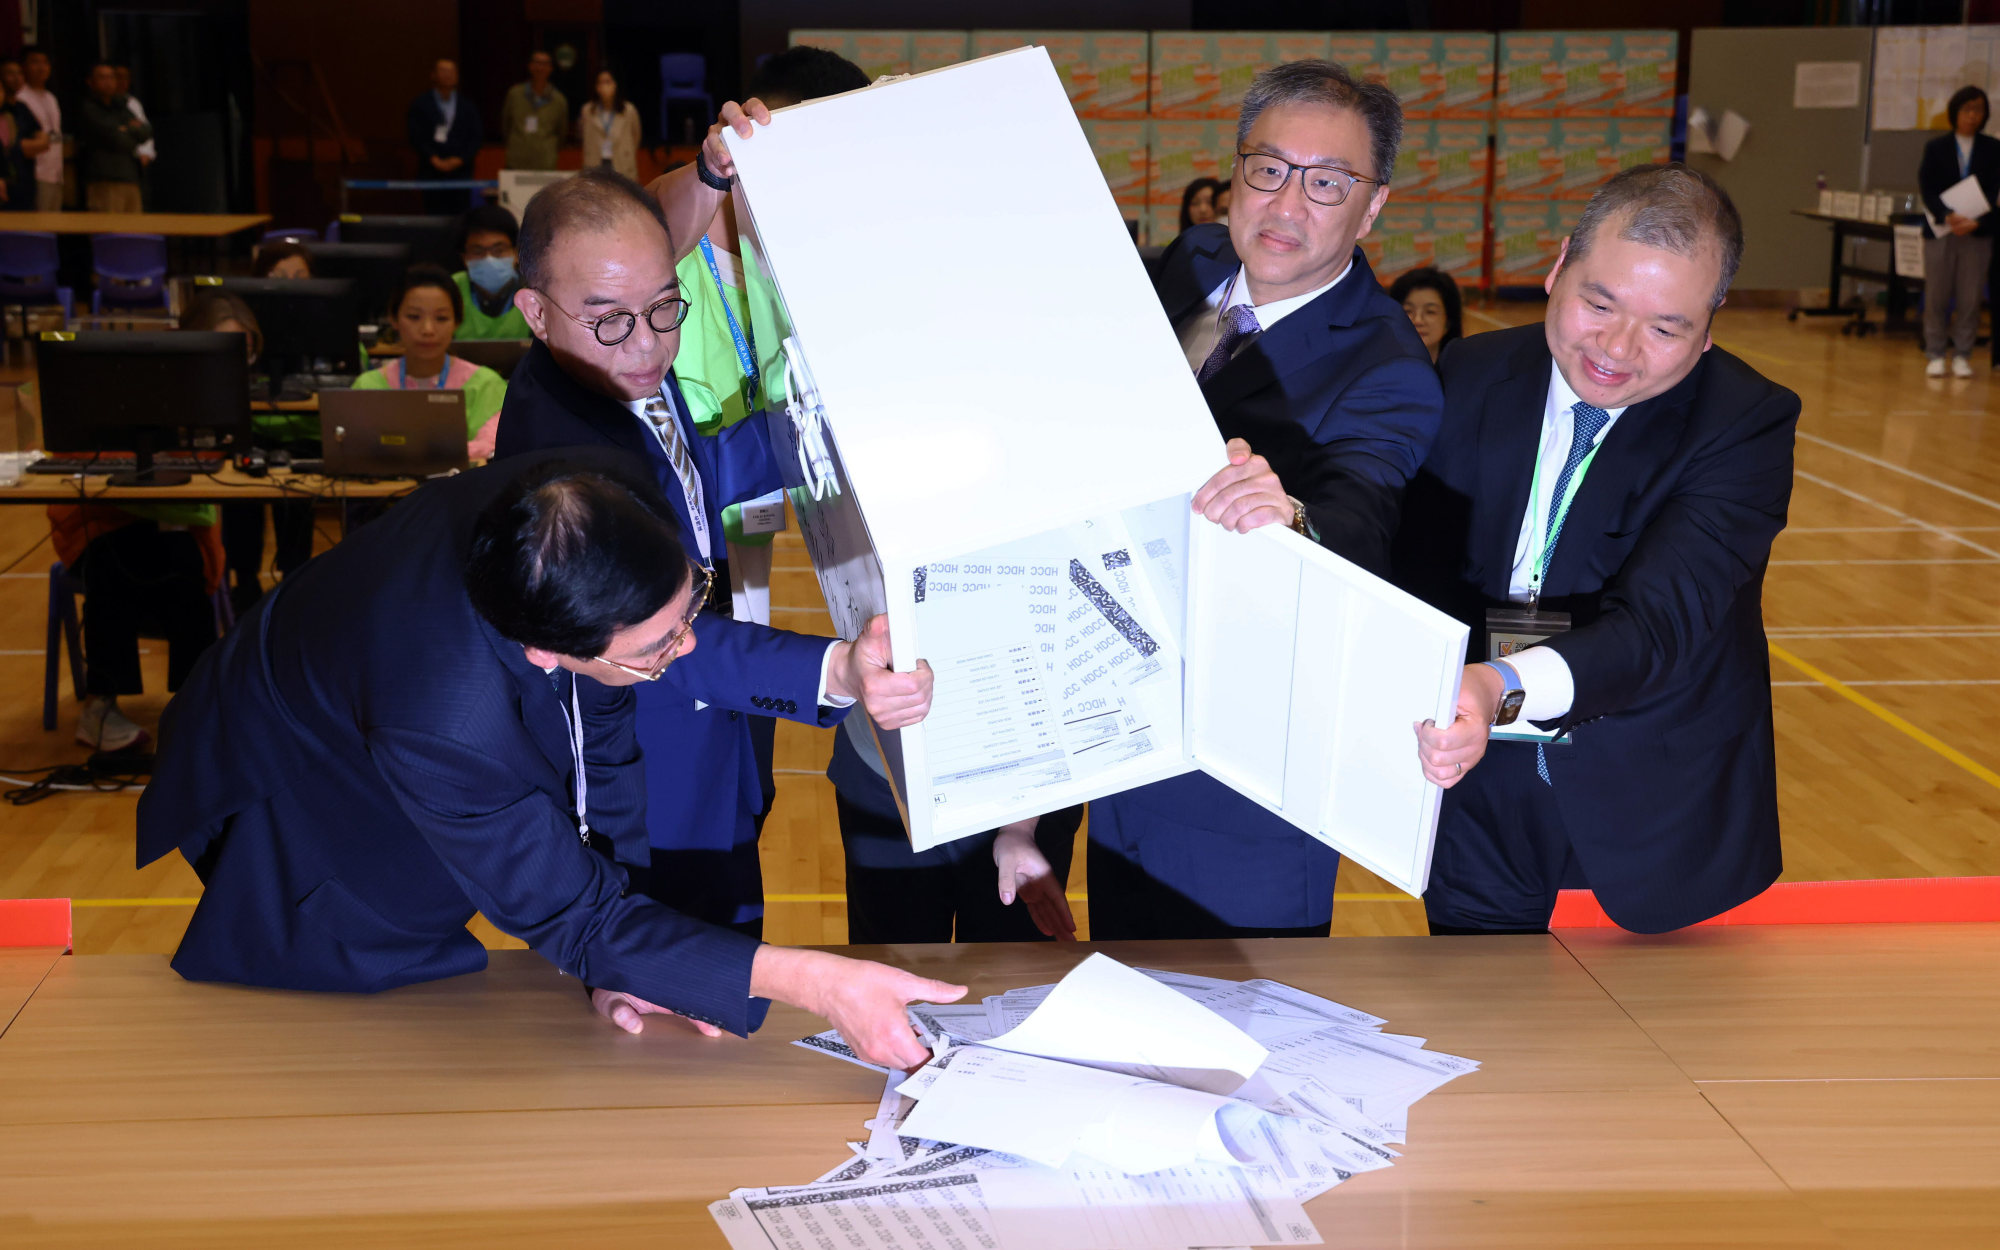 (From left) Electoral Affairs Commission member Daniel Shek, constitutional affairs chief Erick Tsang, commission head Mr Justice David Lok and Senior Counsel Bernard Man empty a ballot box in San Po Kong. Photo: Dickson Lee